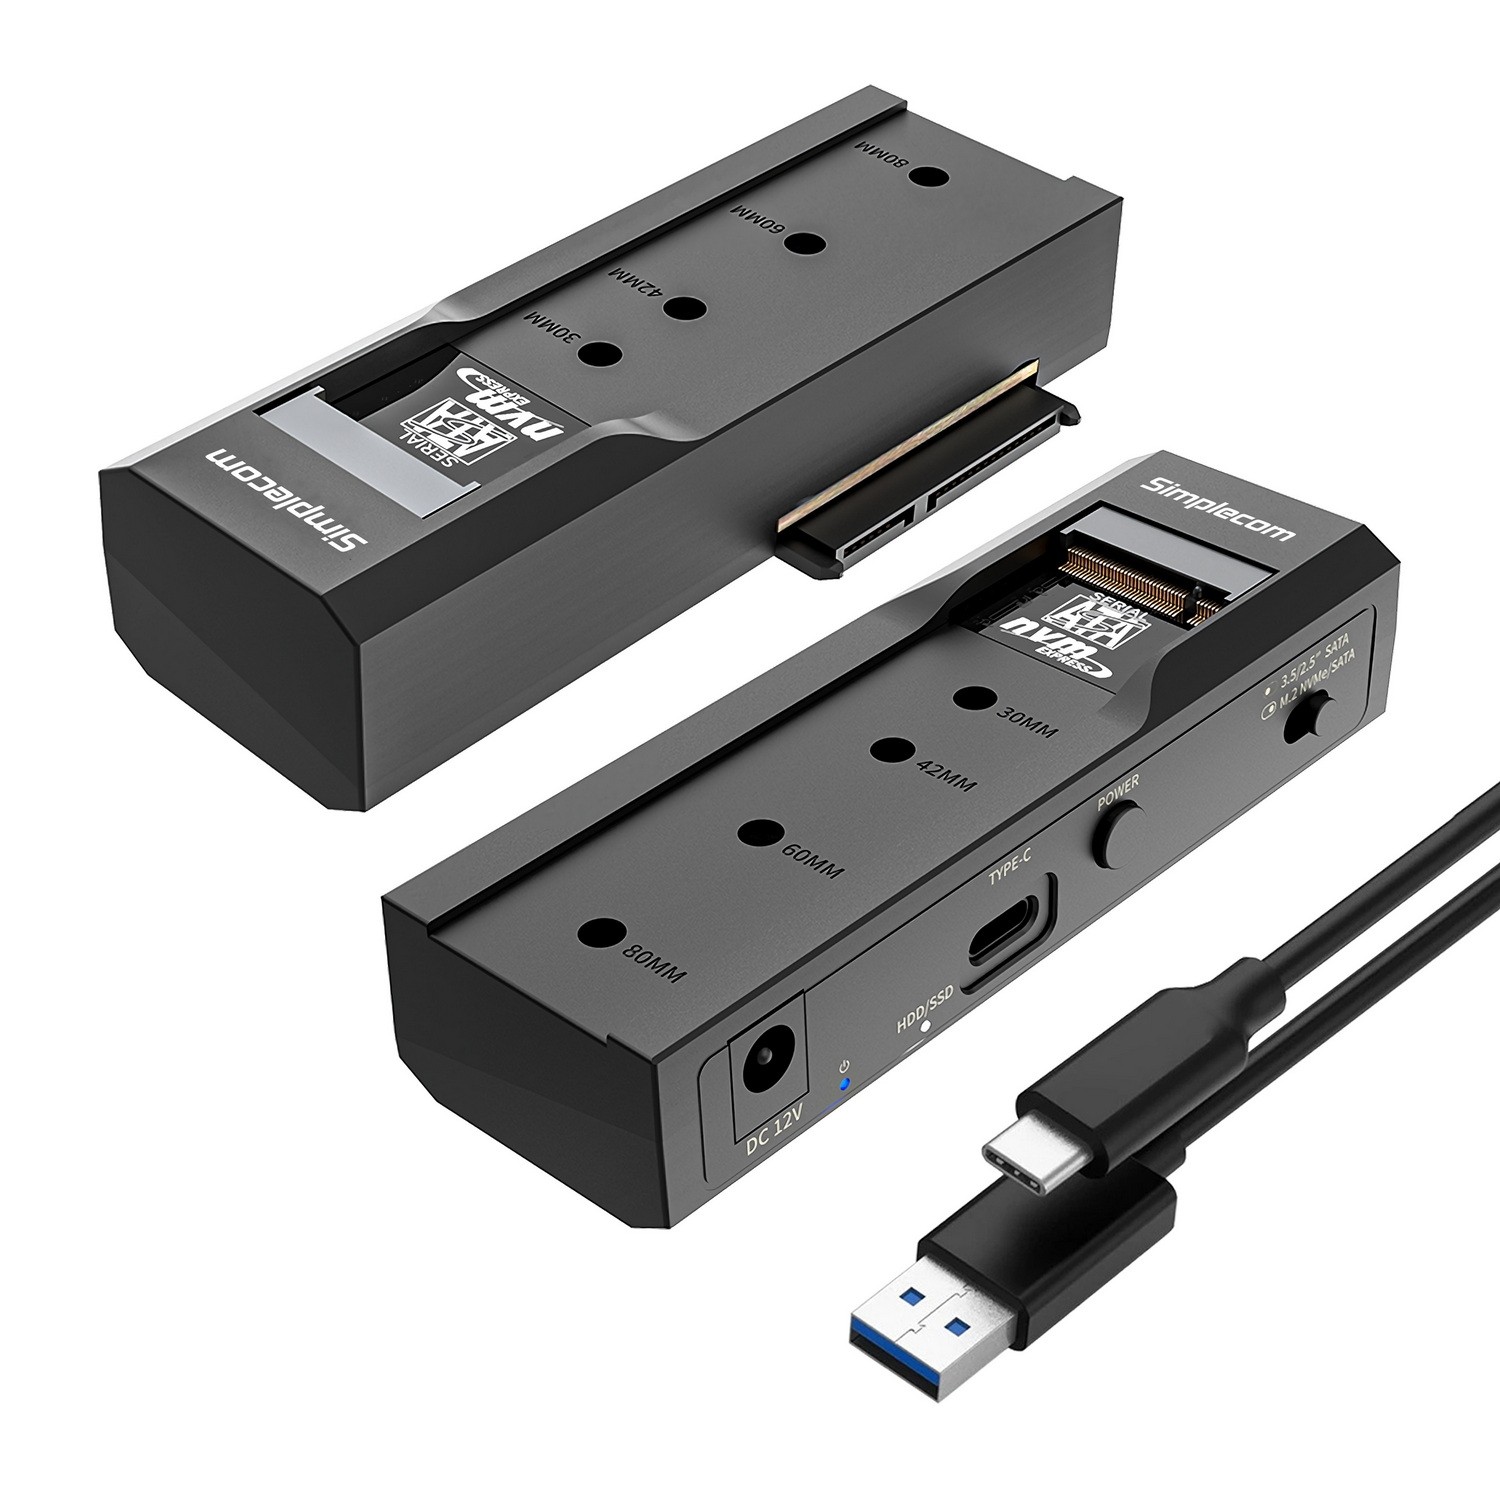 Storage - External/Simplecom: Simplecom, SA536, USB, to, M.2, and, SATA, 2-IN-1, Adapter, for, 2.5, /3.5, HDD, &, NVMe/SATA, M.2, SSD, with, Power, Supply, USB, 3.2, Gen2, 